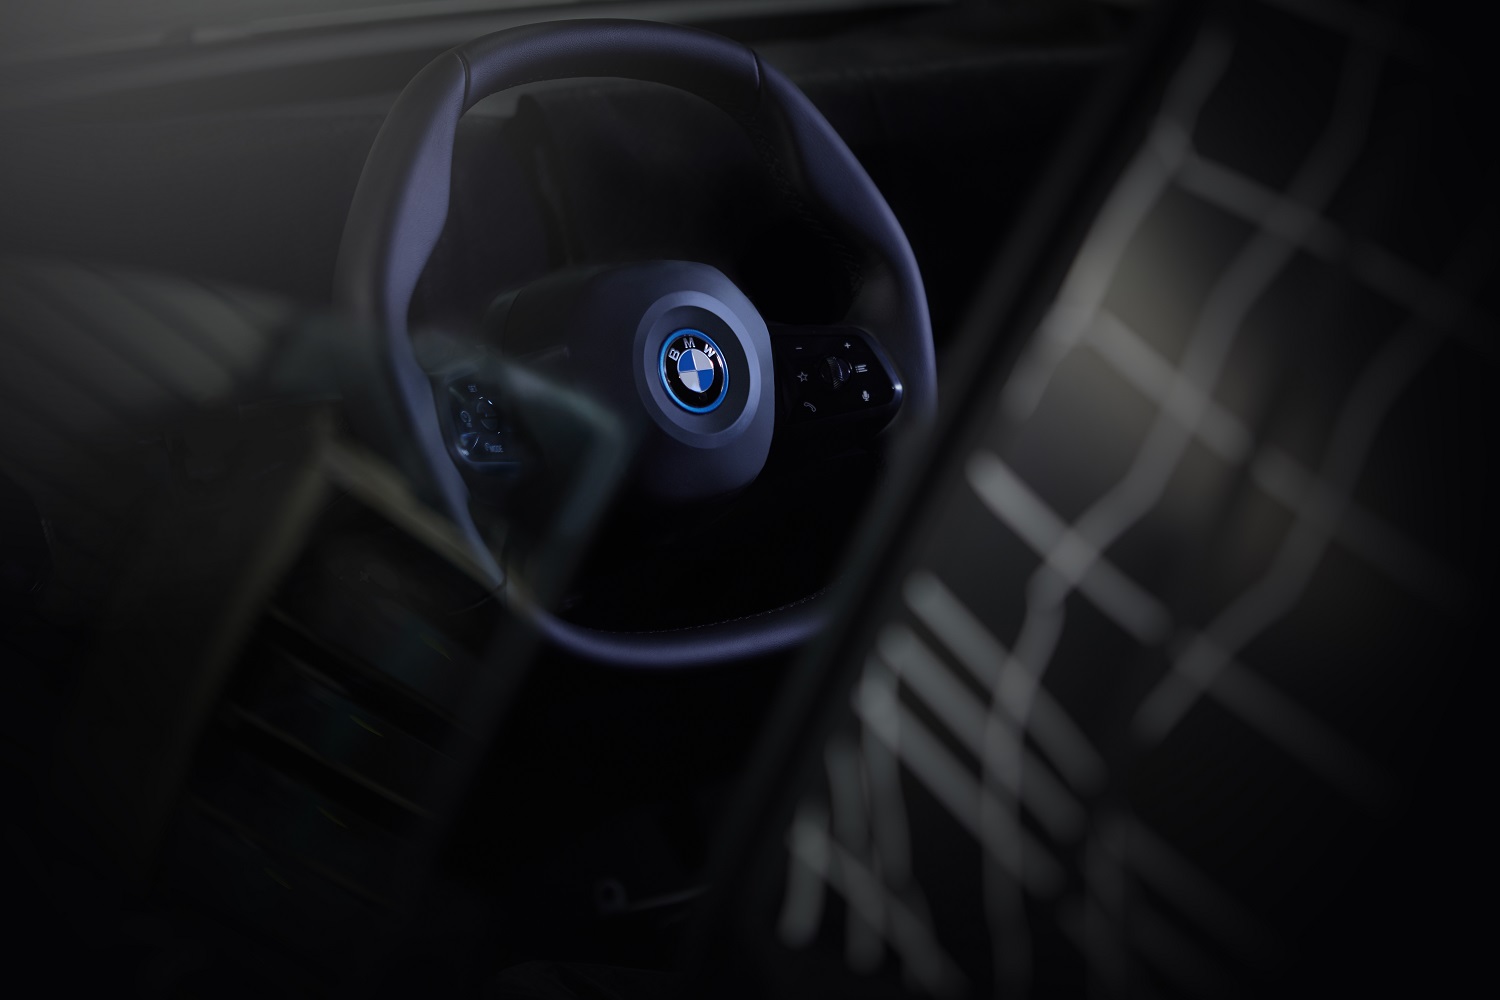 bmw inext will be an electric autonomous connected tech flagship polygonal steering wheel